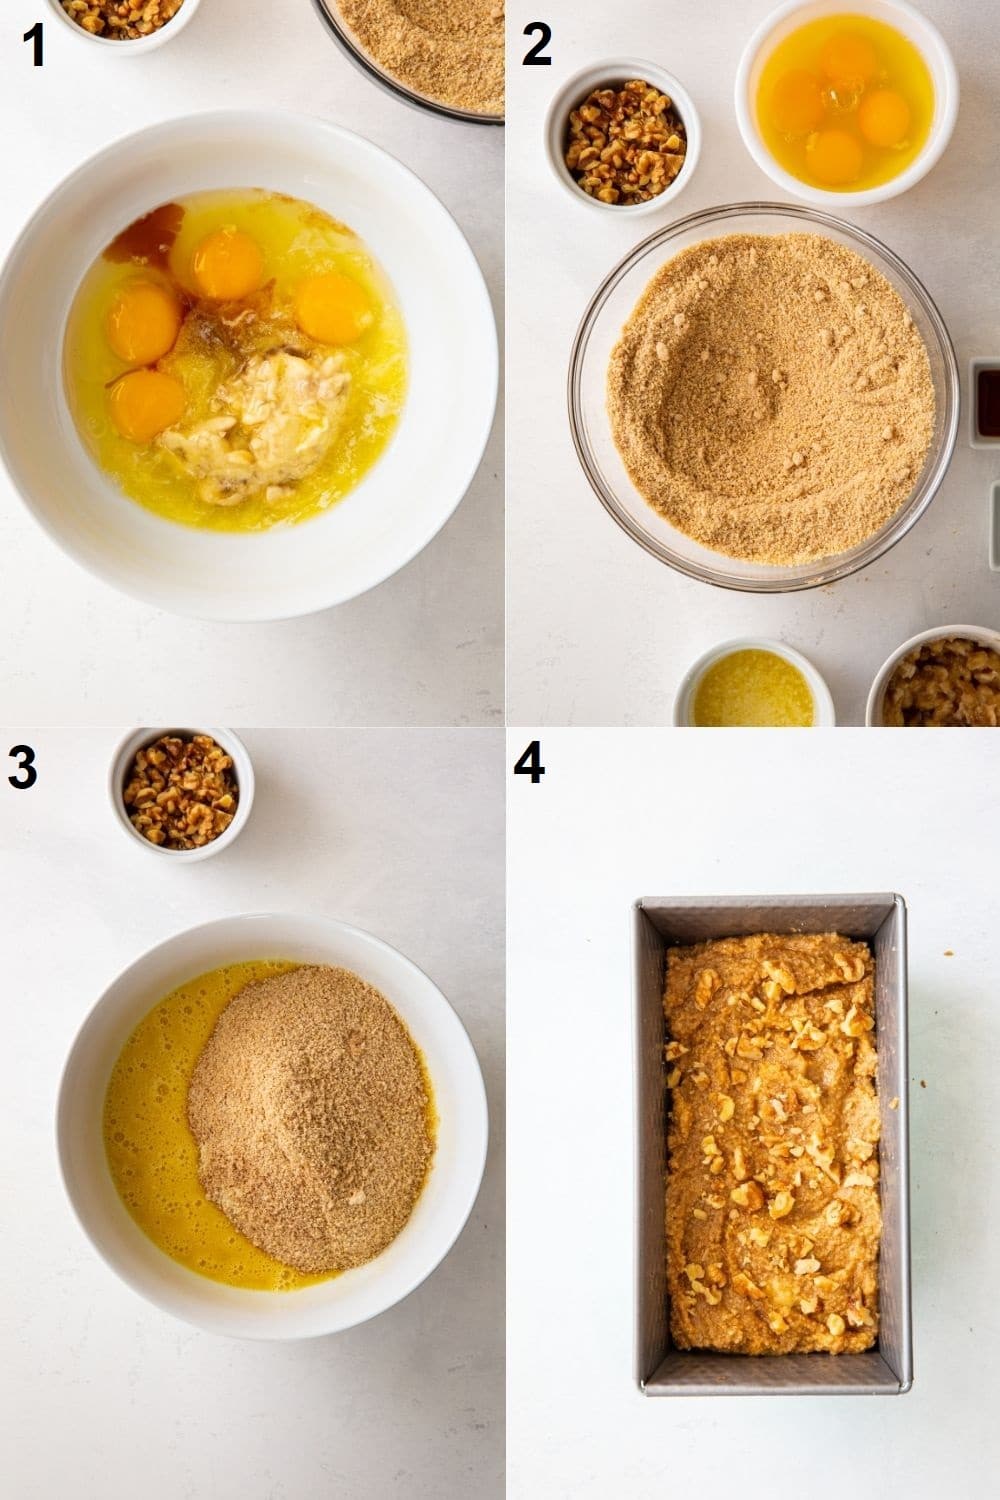 Photo collage showing the four steps you need to make Keto banana bread from scratch.